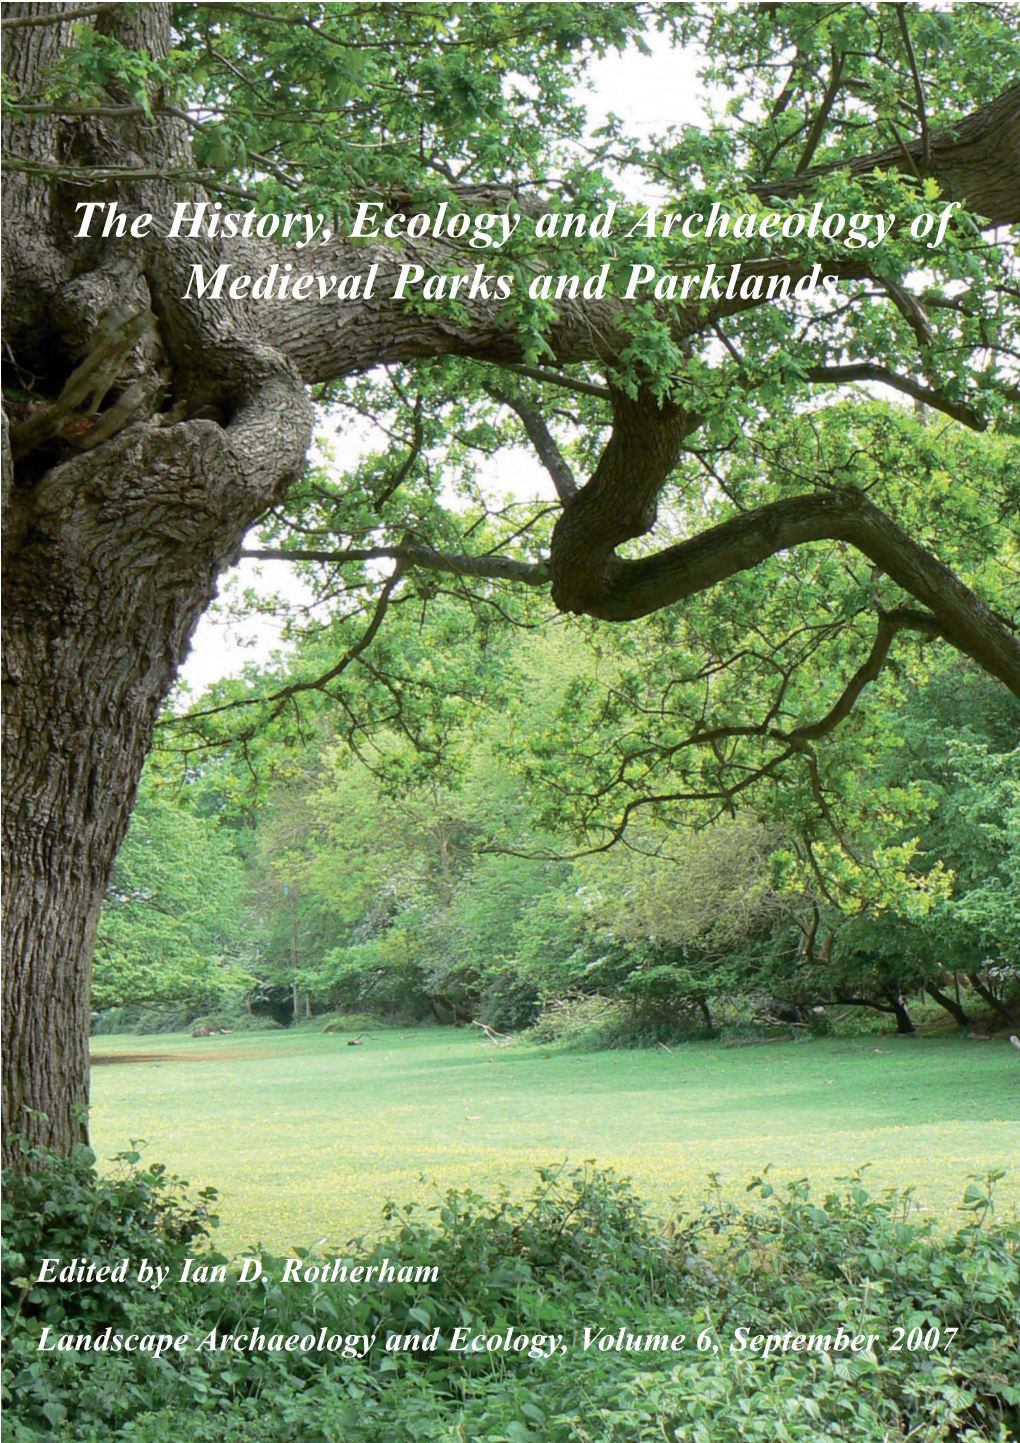 The History, Ecology and Archaeology of Medieval Parks and Parklands